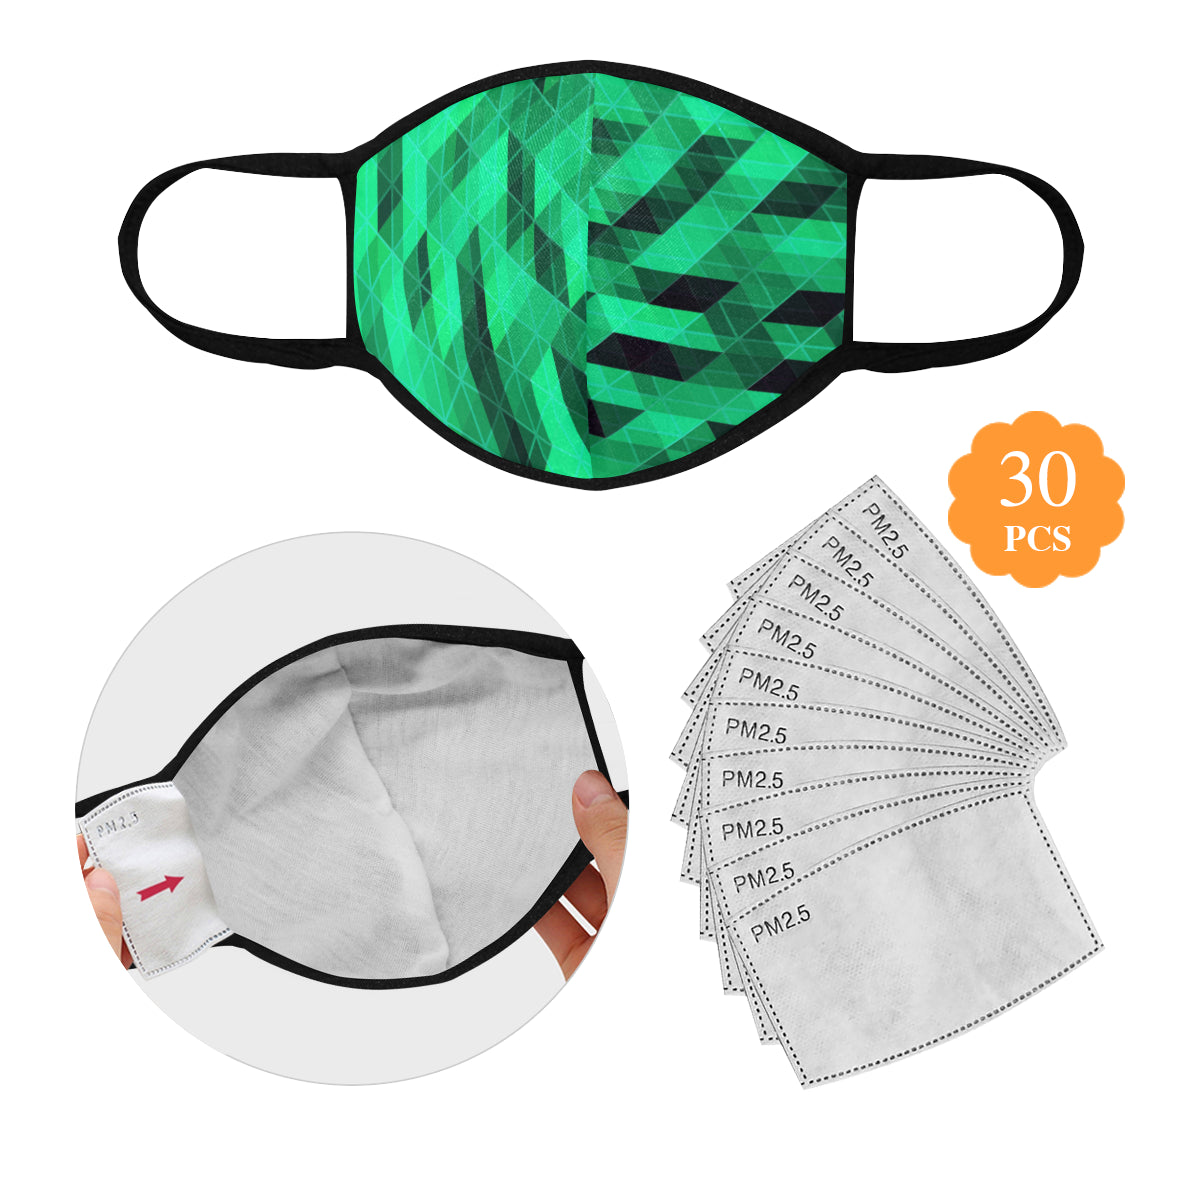 Leaf Graphic Cotton Fabric Face Mask with filter slot (30 Filters Included) - Non-medical use